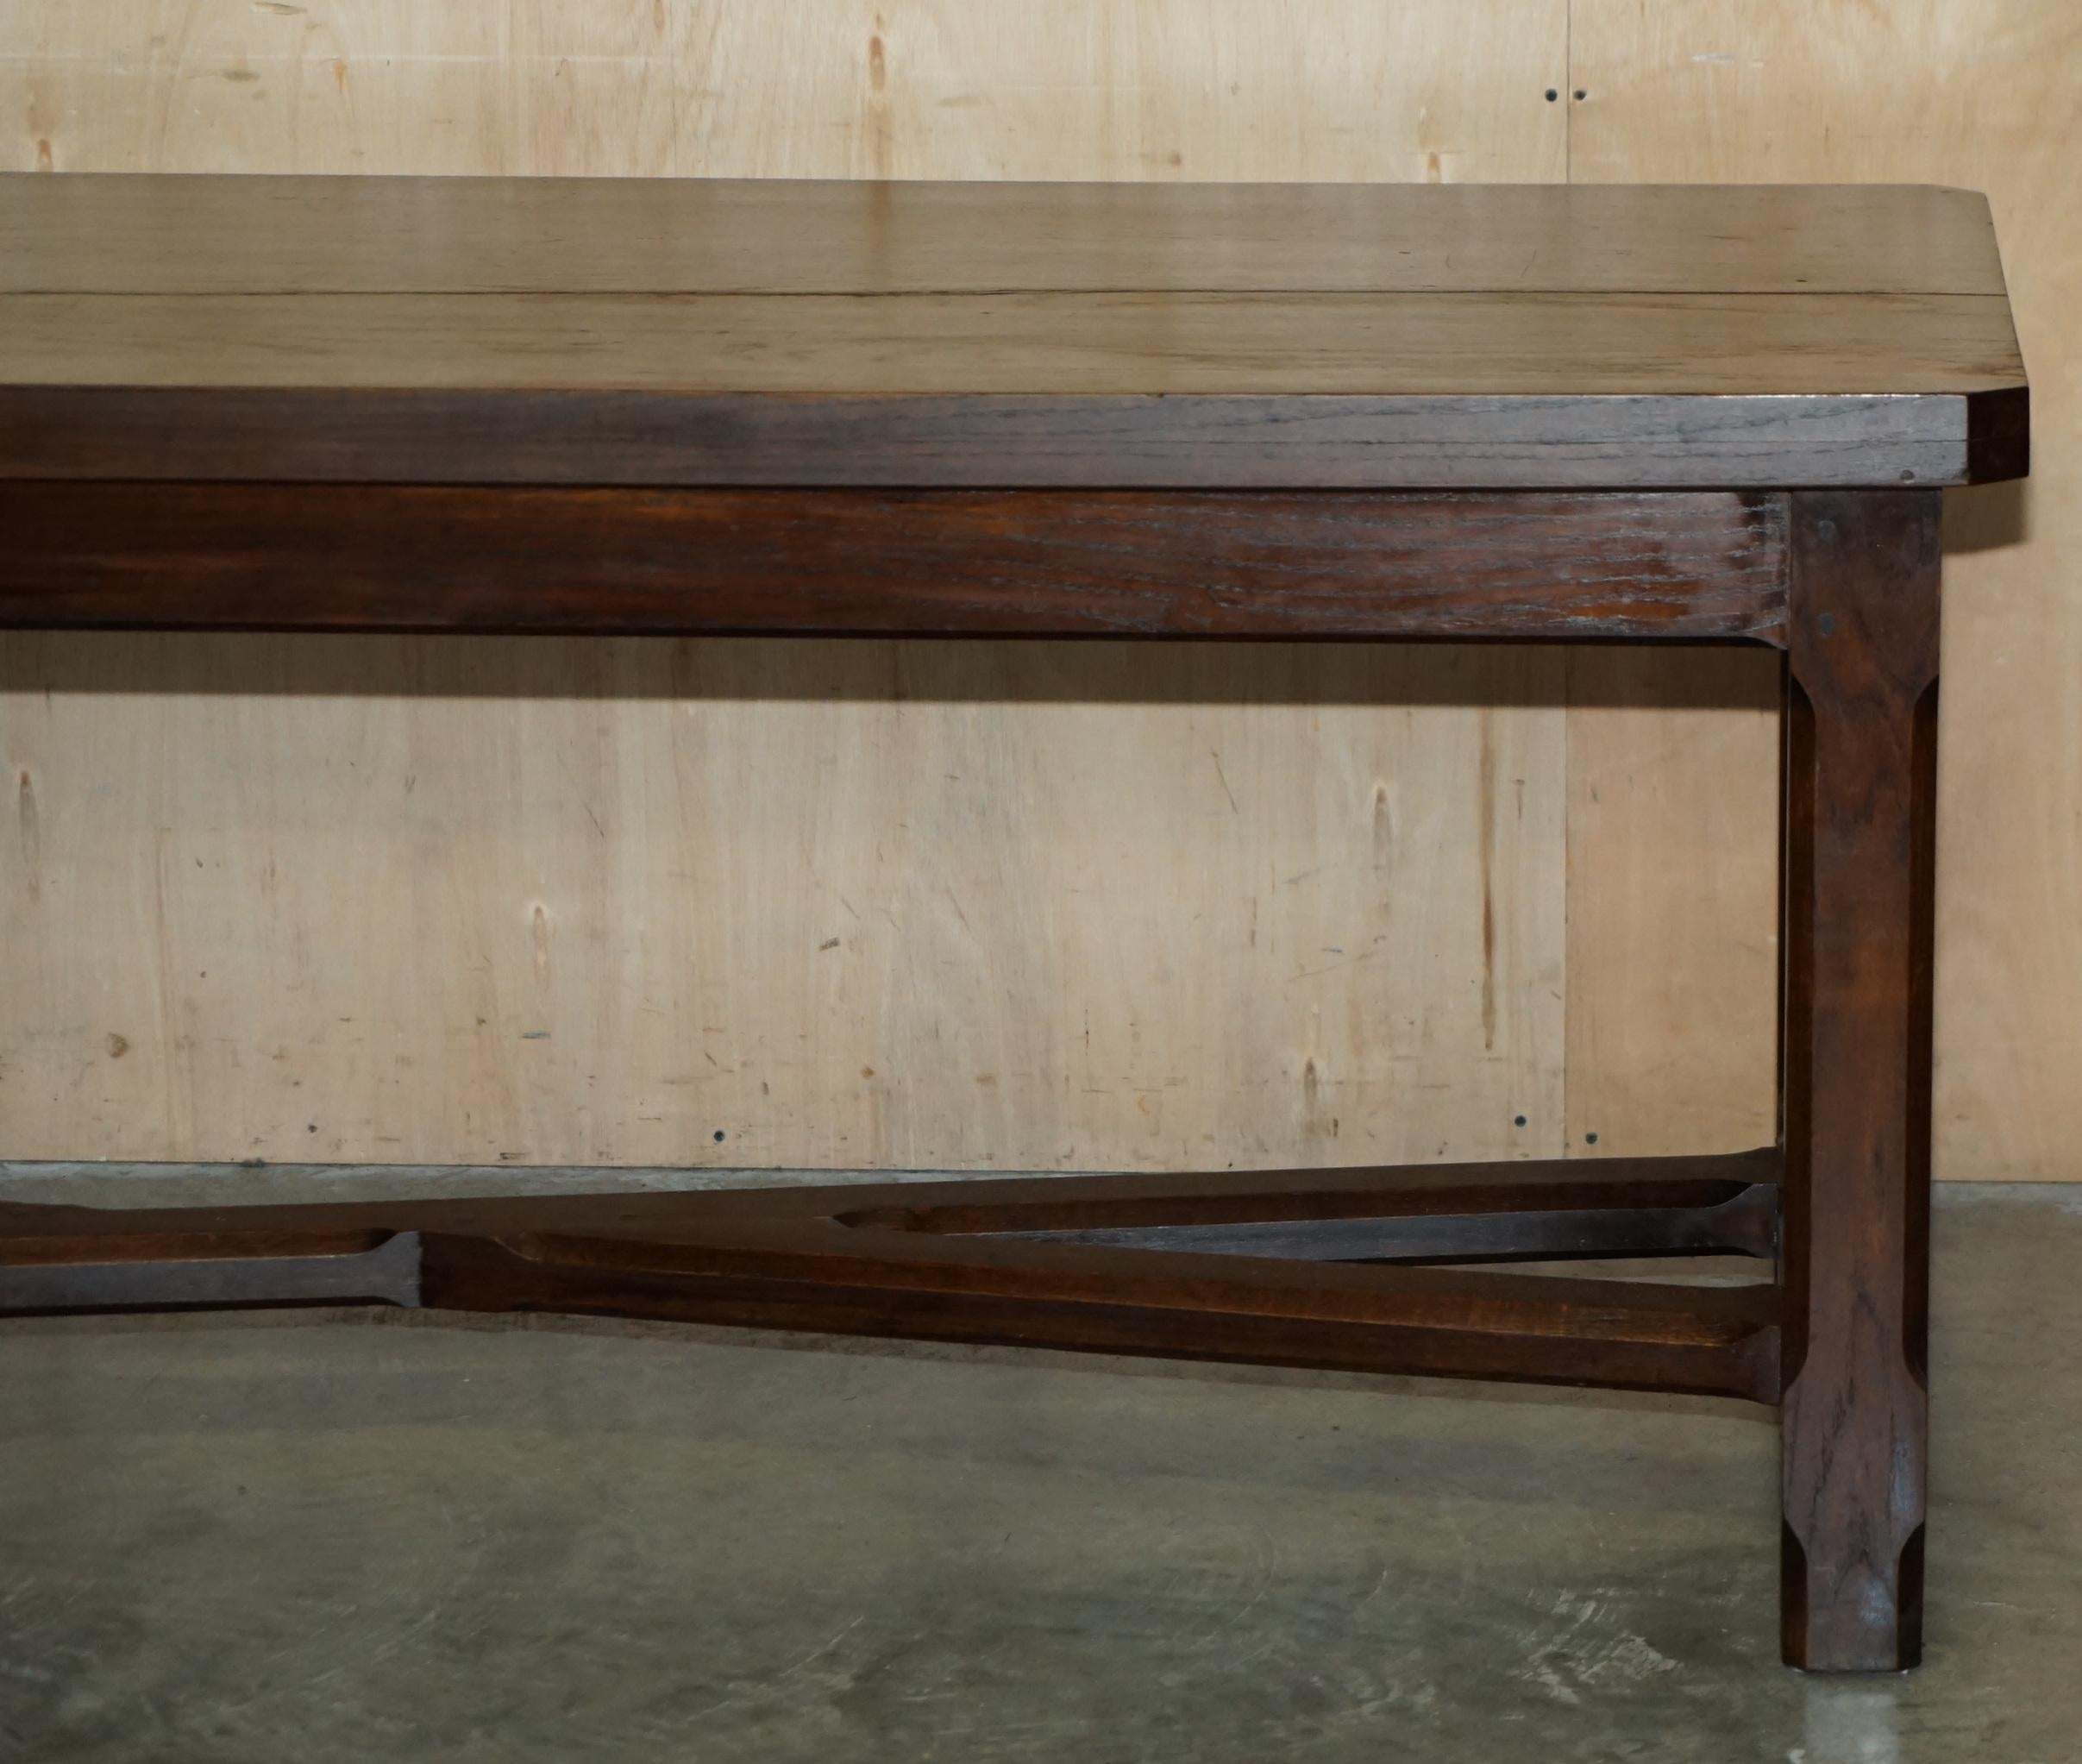 19TH CENTURY FRENCH OAK REFECTORY HAYRAKE DiNING TABLE WITH STUNNING BASE For Sale 1